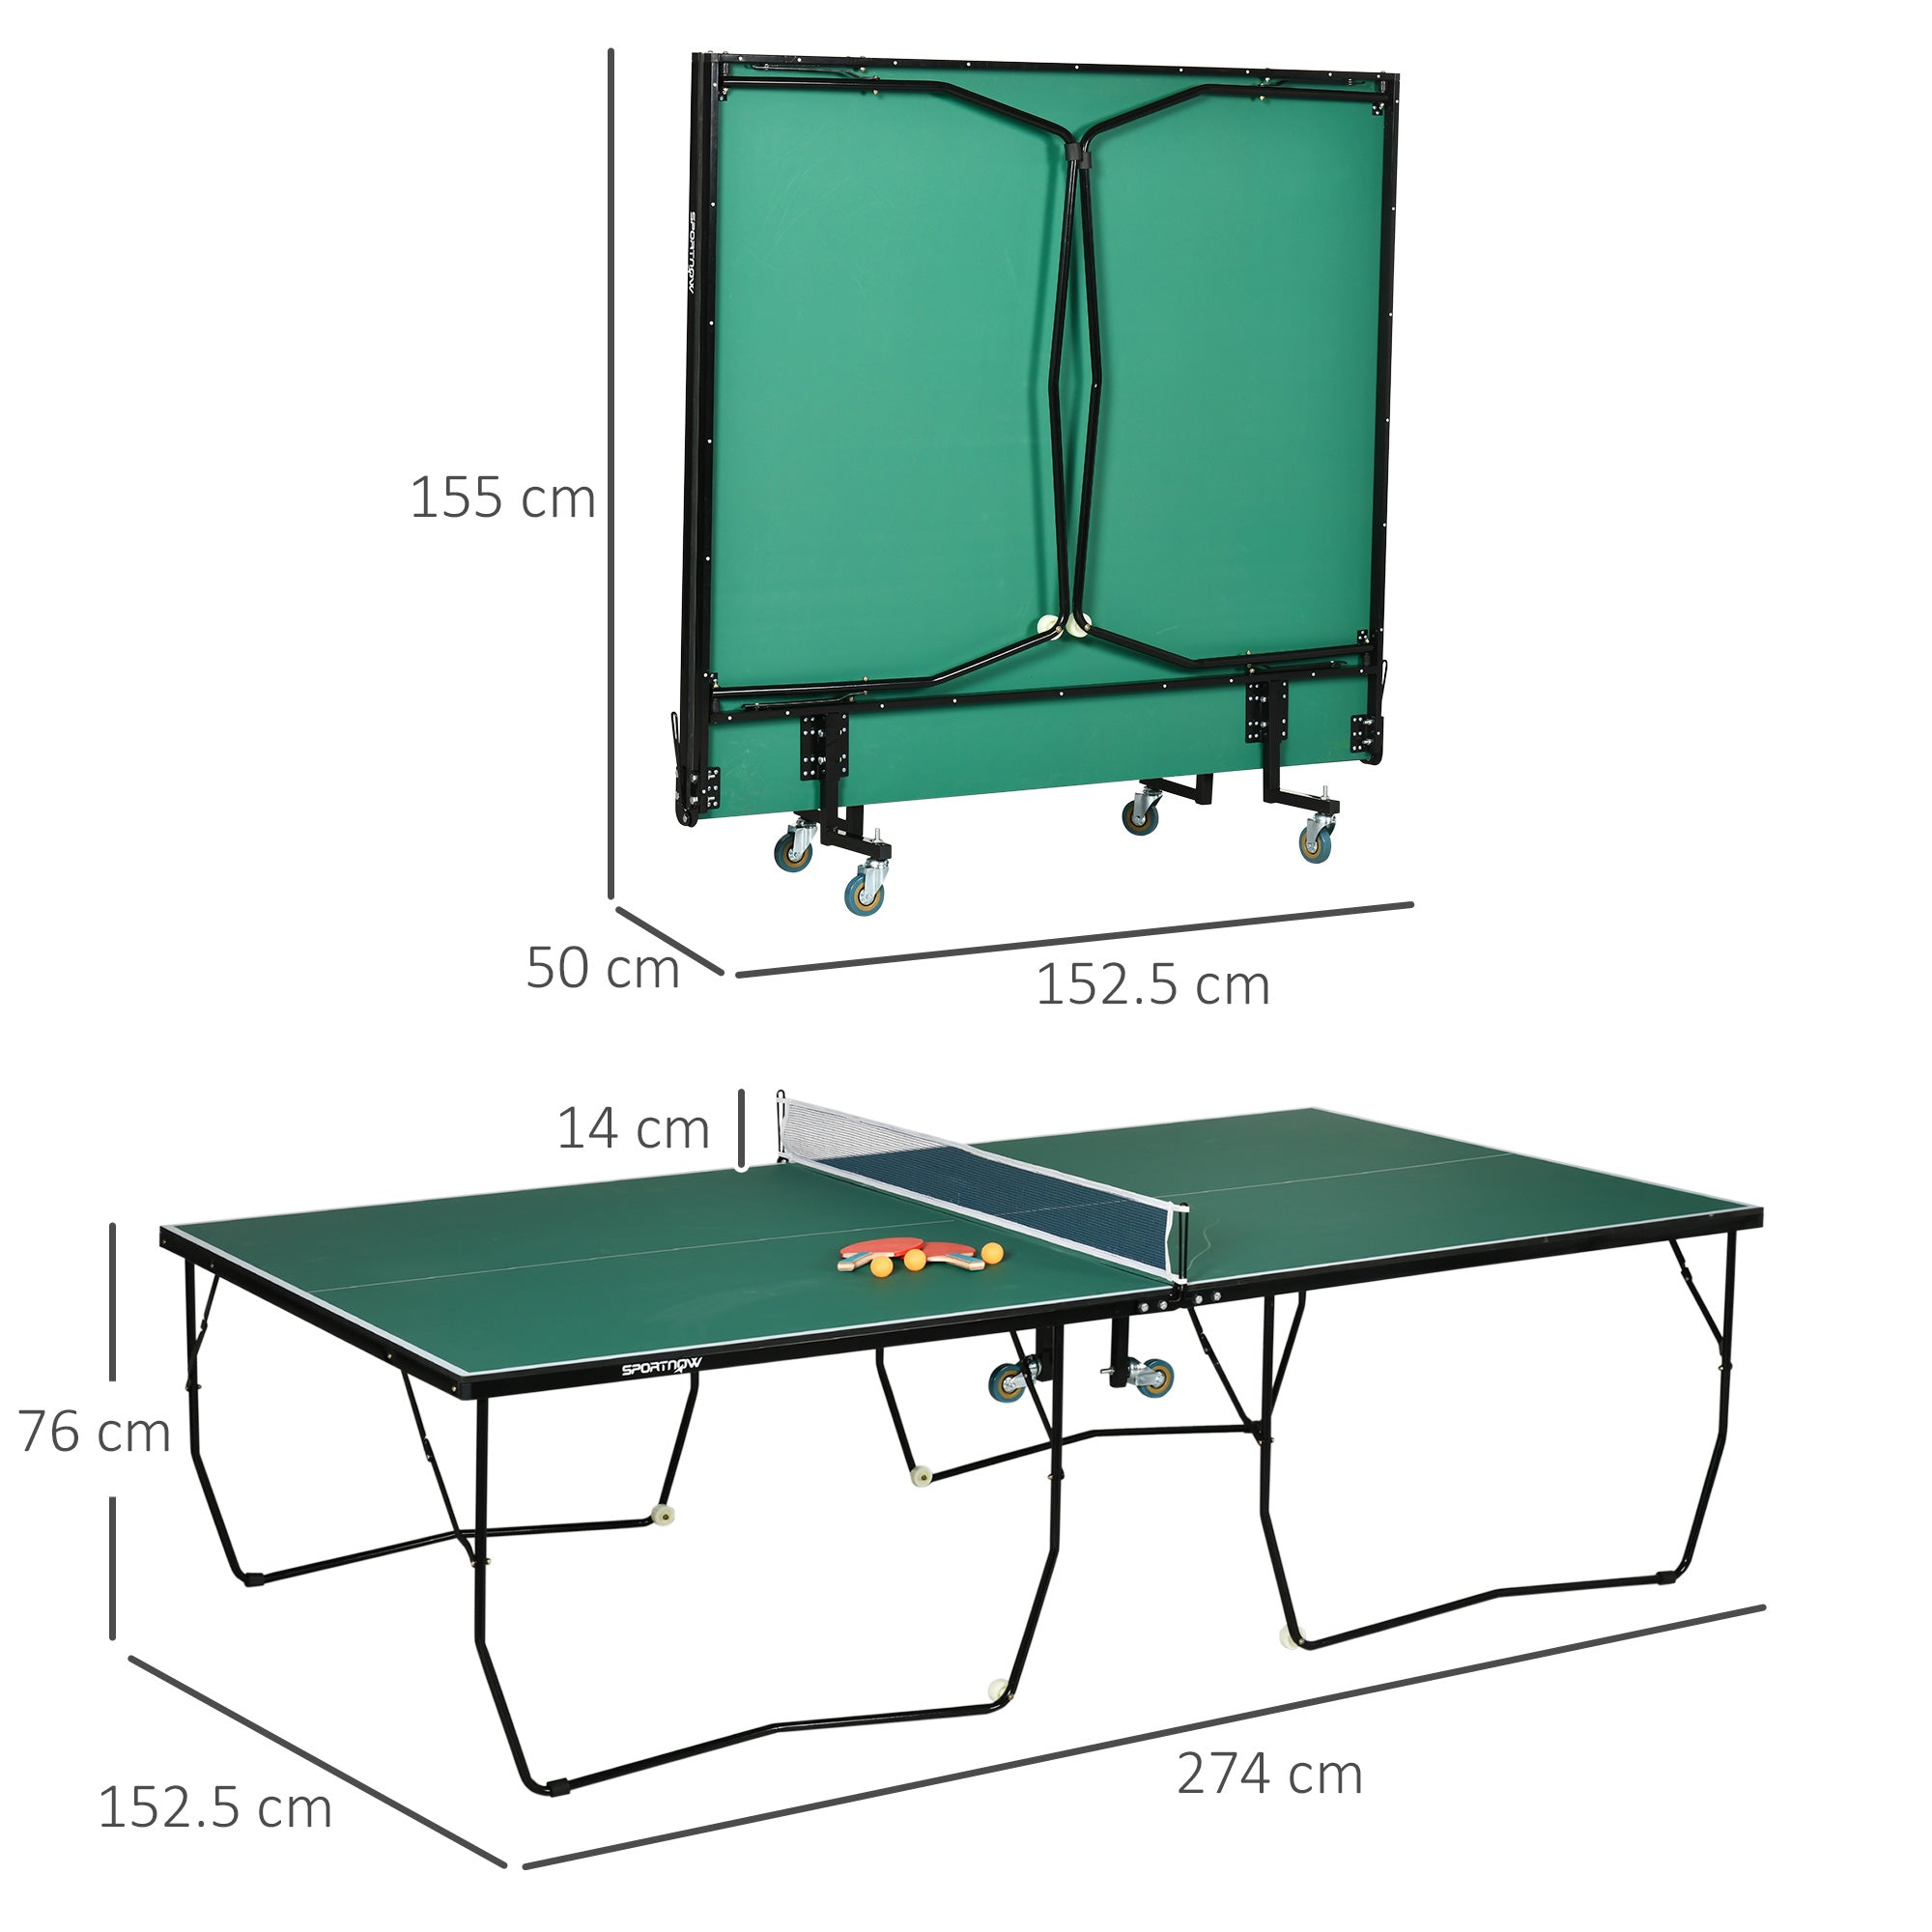 9FT Outdoor Folding Table, Tennis Table, with 8 Wheels, for Indoor and Outdoor Use - Green-2